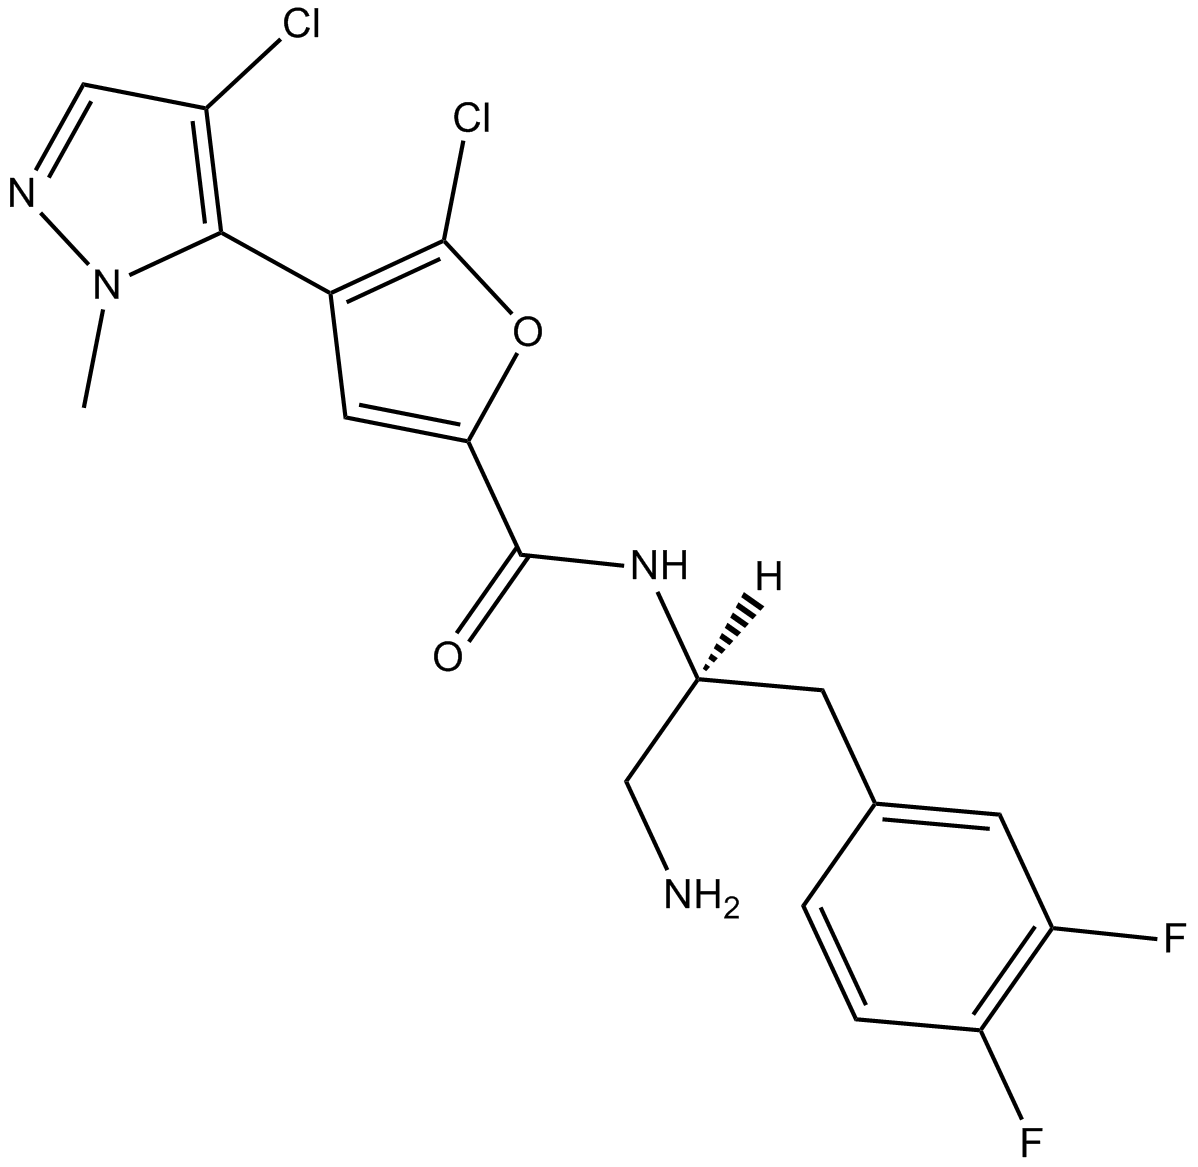 GSK2141795  Chemical Structure